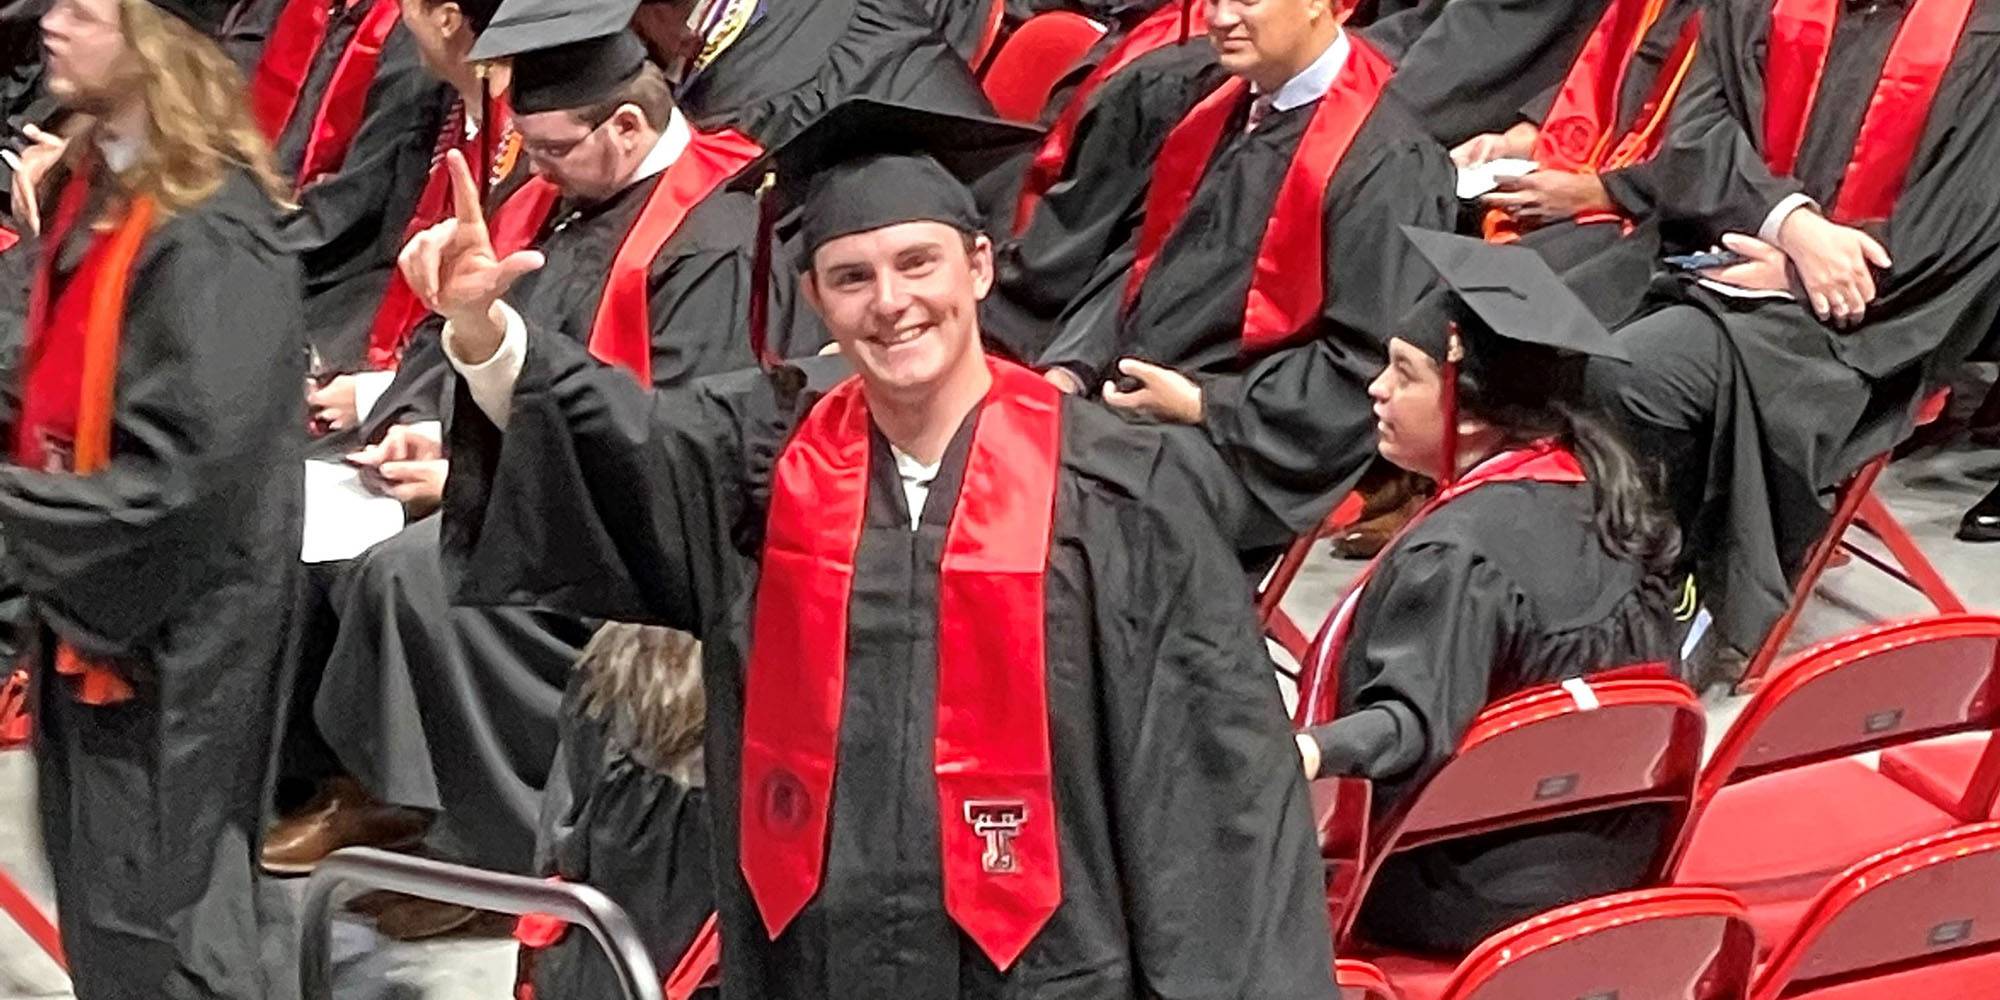 A student earing black robes with red makes a Texas Tech symbol with his hand.